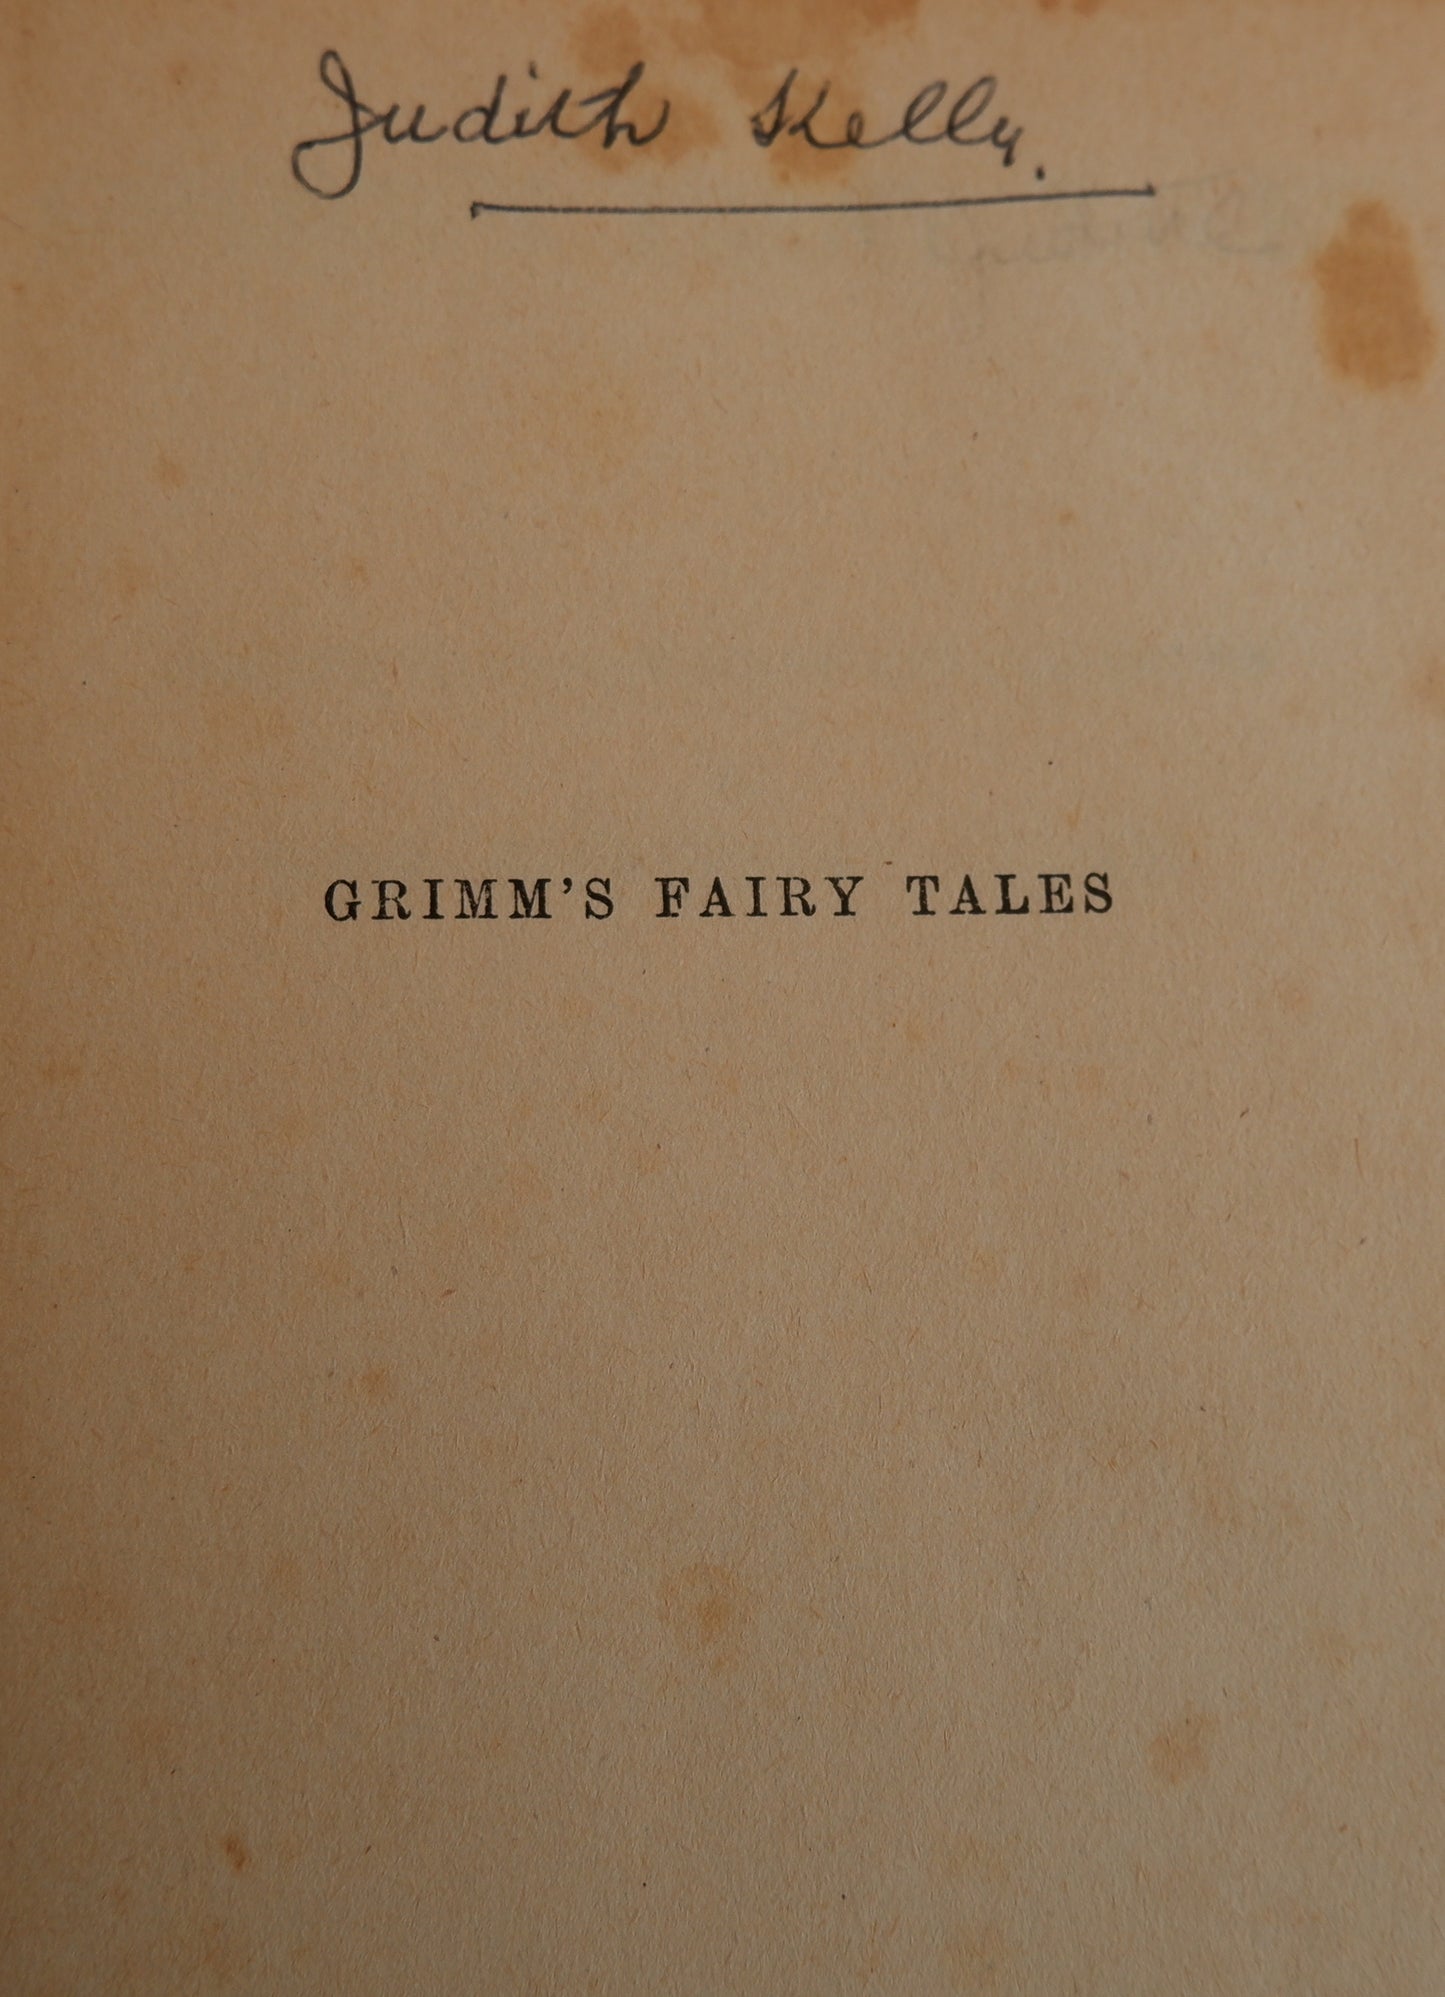 Grimm's Fairy Tales - Carefully chosen from the Collection by The Brothers Grimm